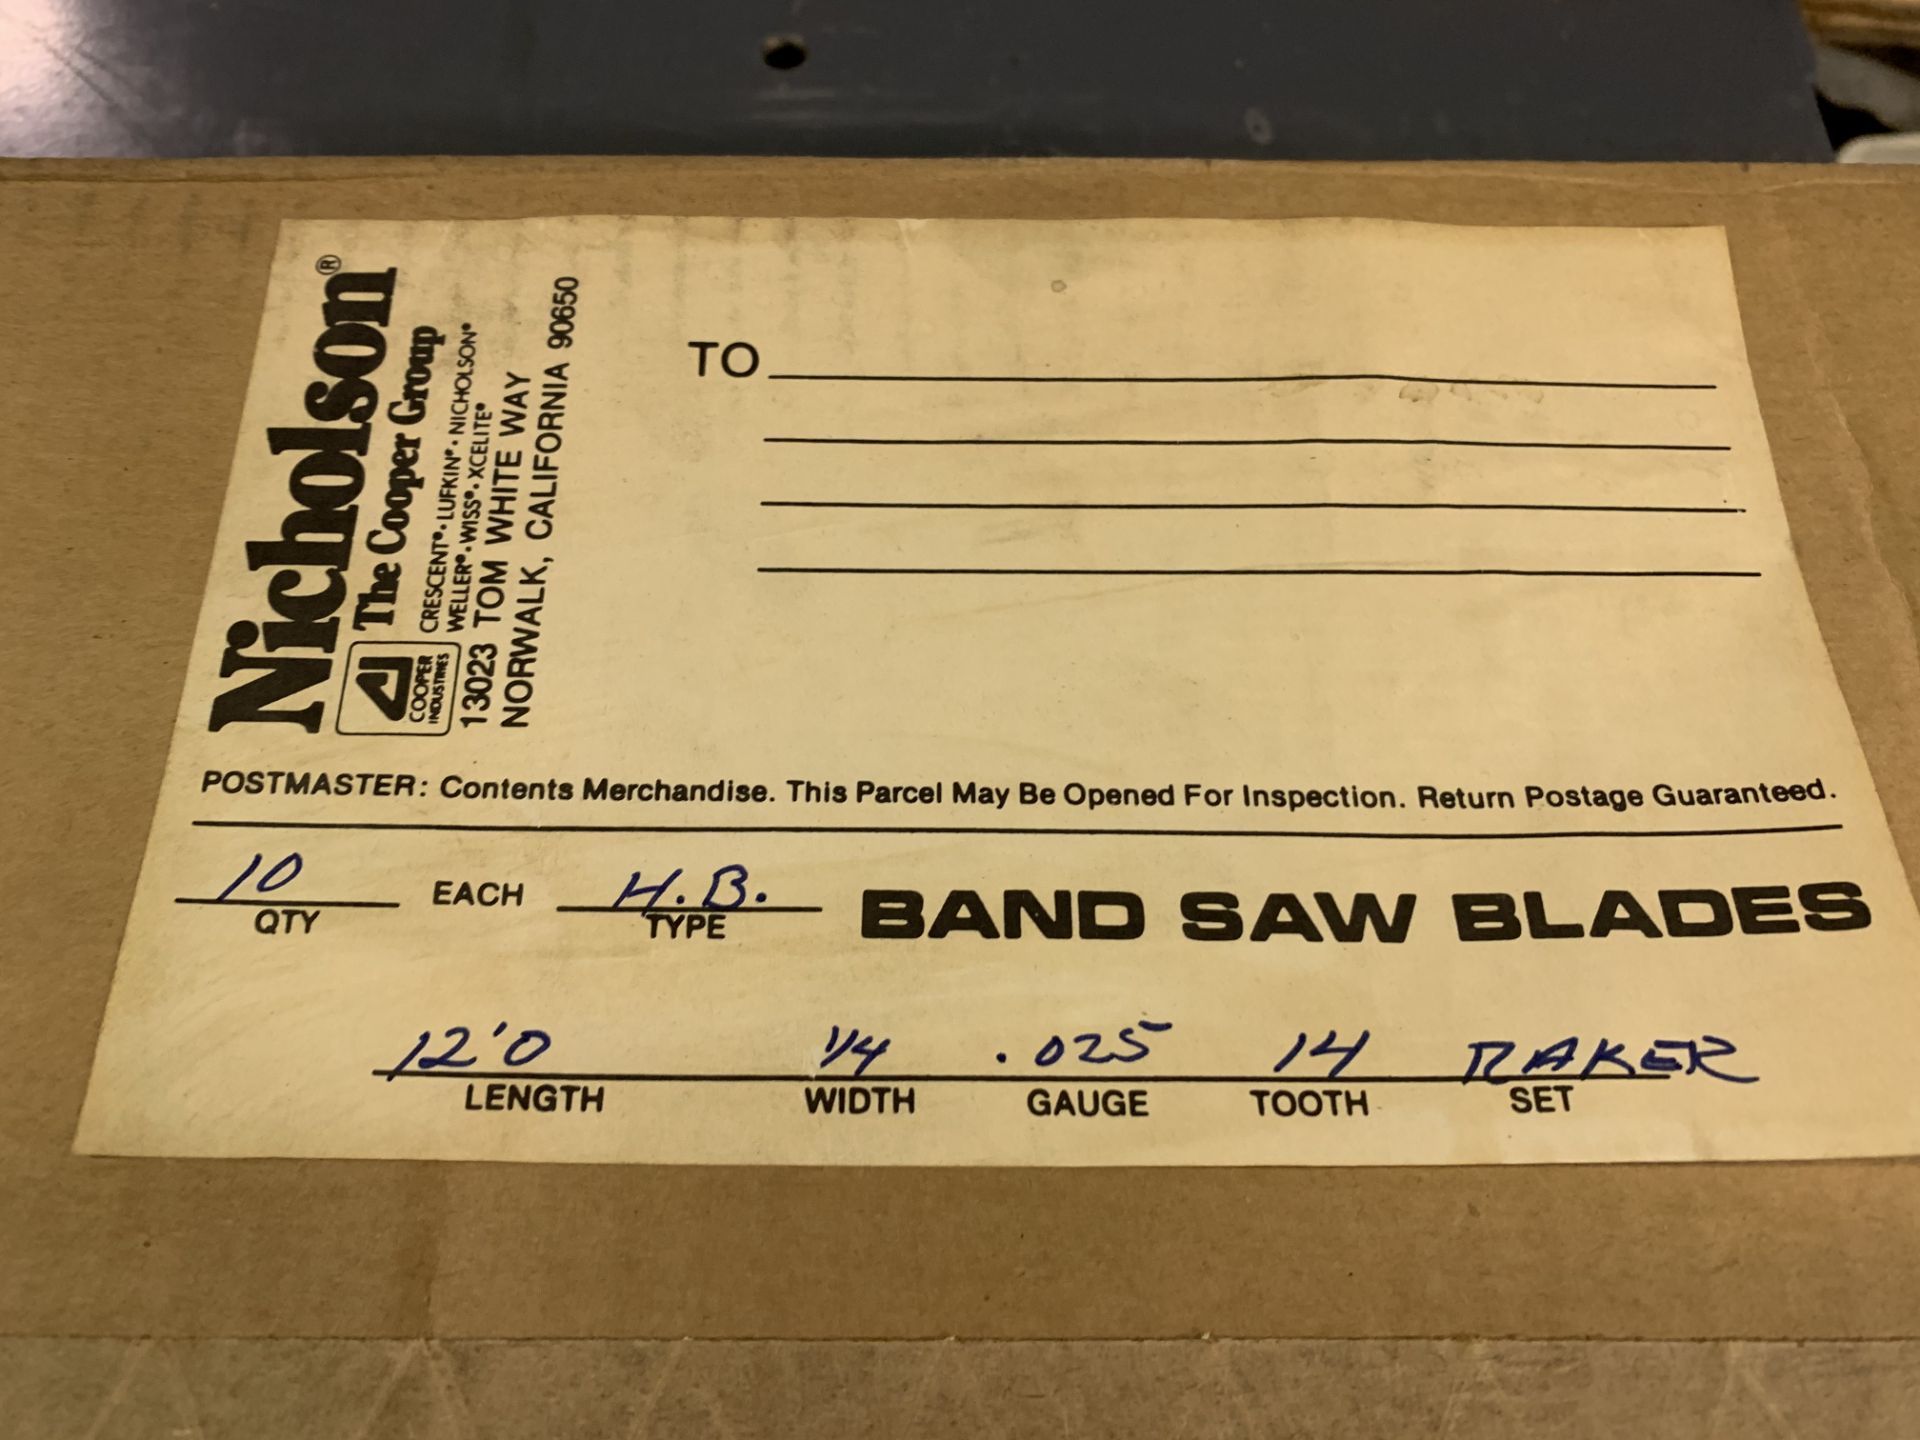 (10) Nicholson Bandsaw Blades, 12" length, 1/4" Width, 14 Tooth - Image 2 of 2